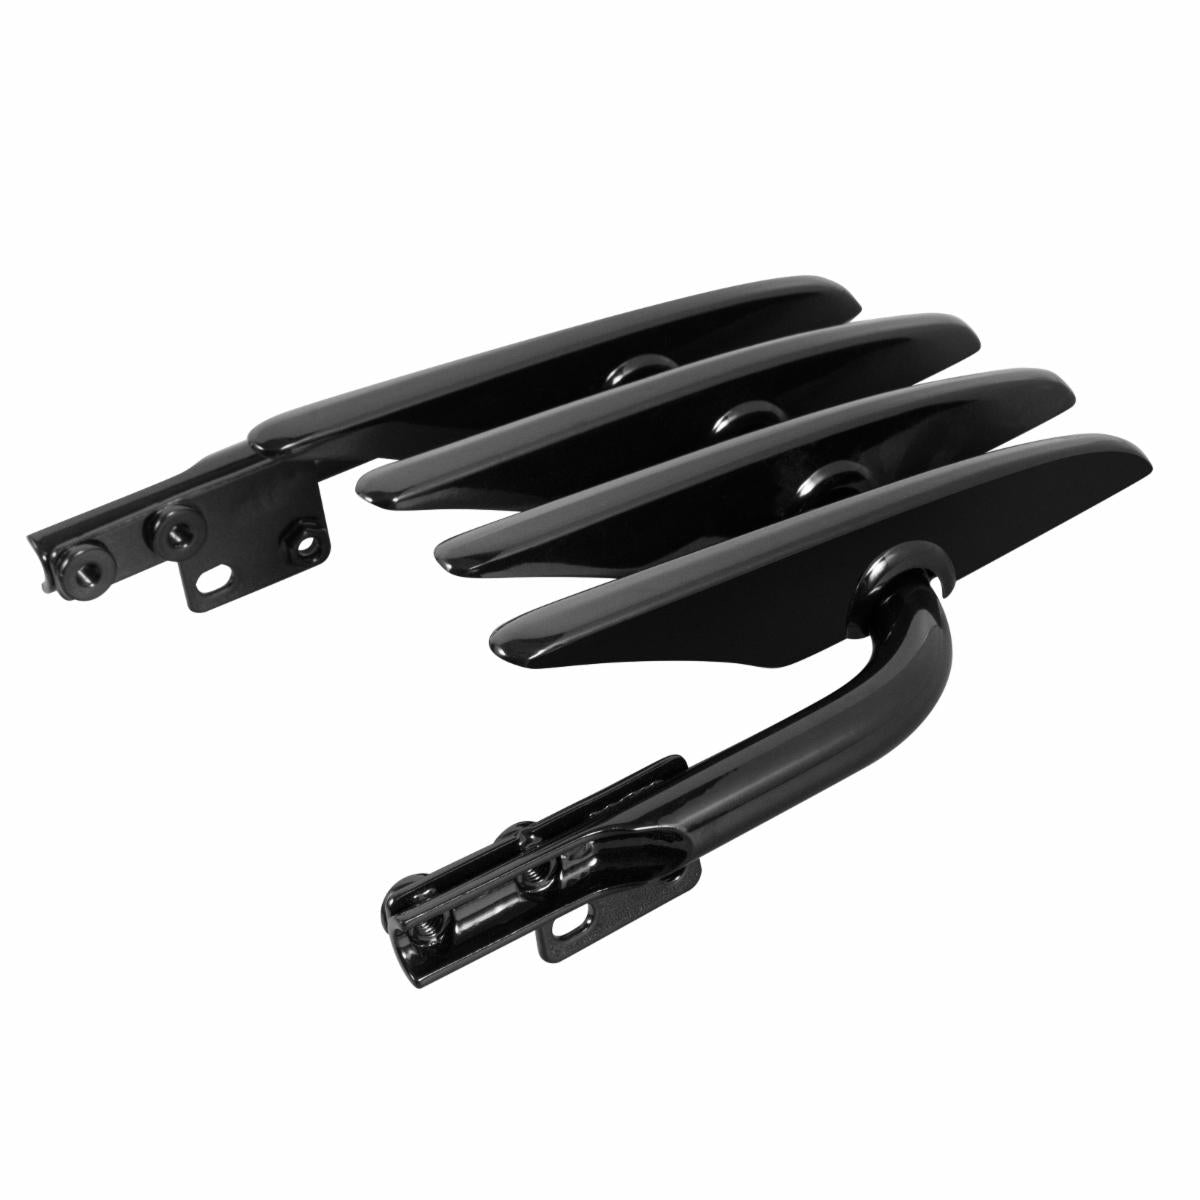 '99-'08 Harley Touring Stealth Luggage Rack